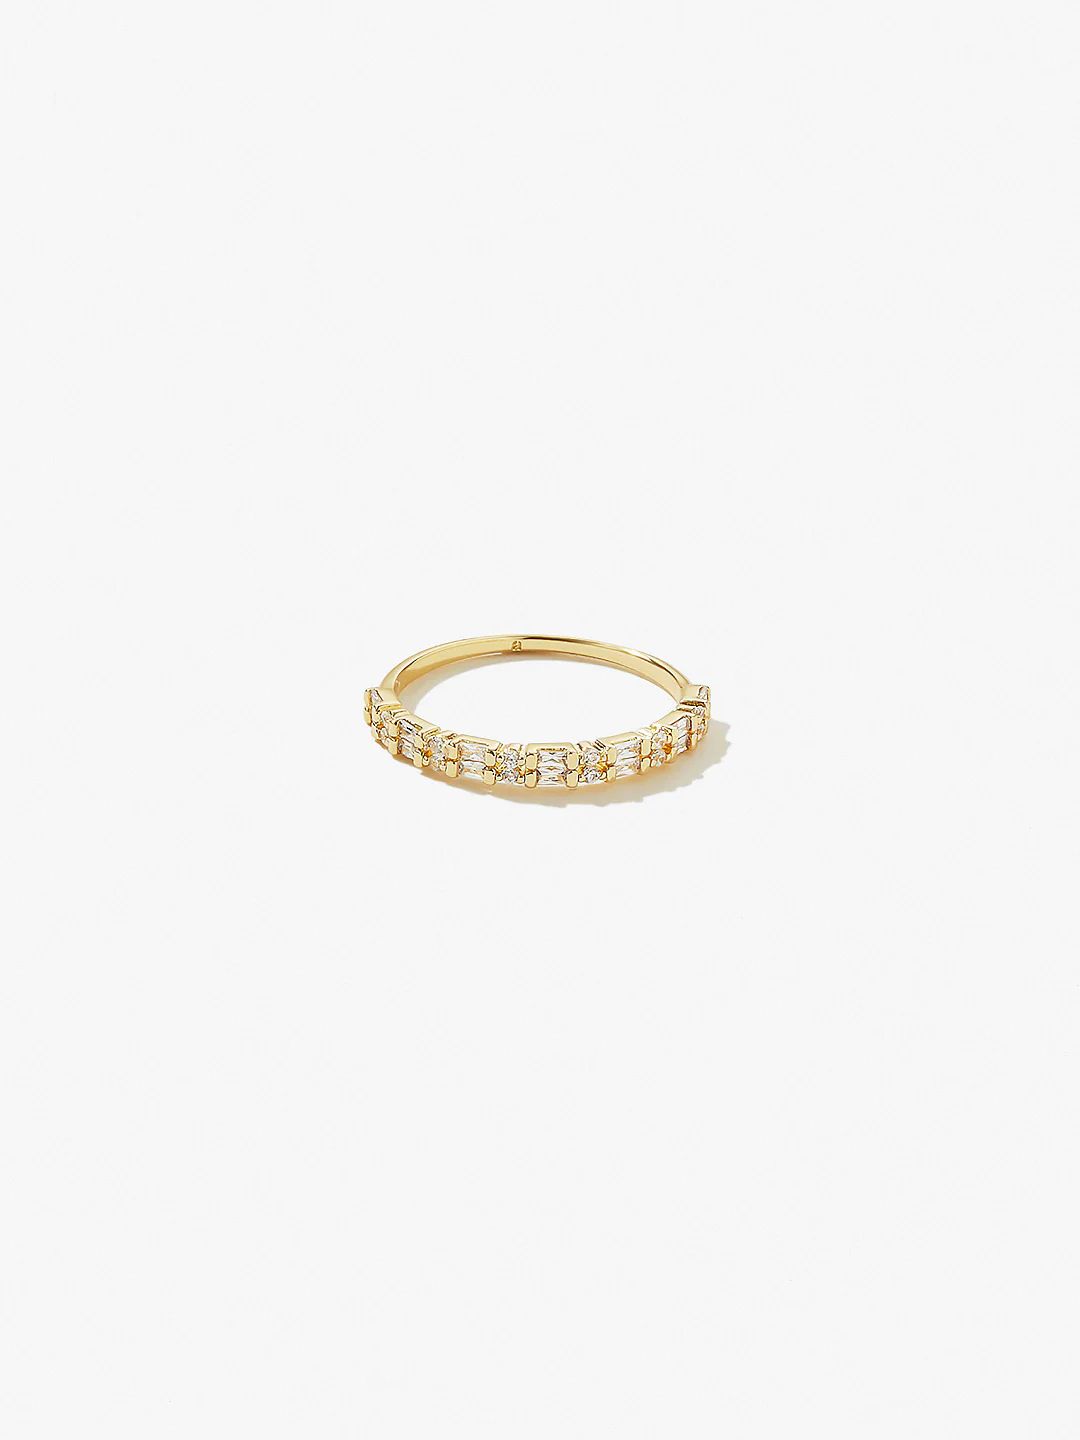 Stackable Ring - Darcy | Ana Luisa